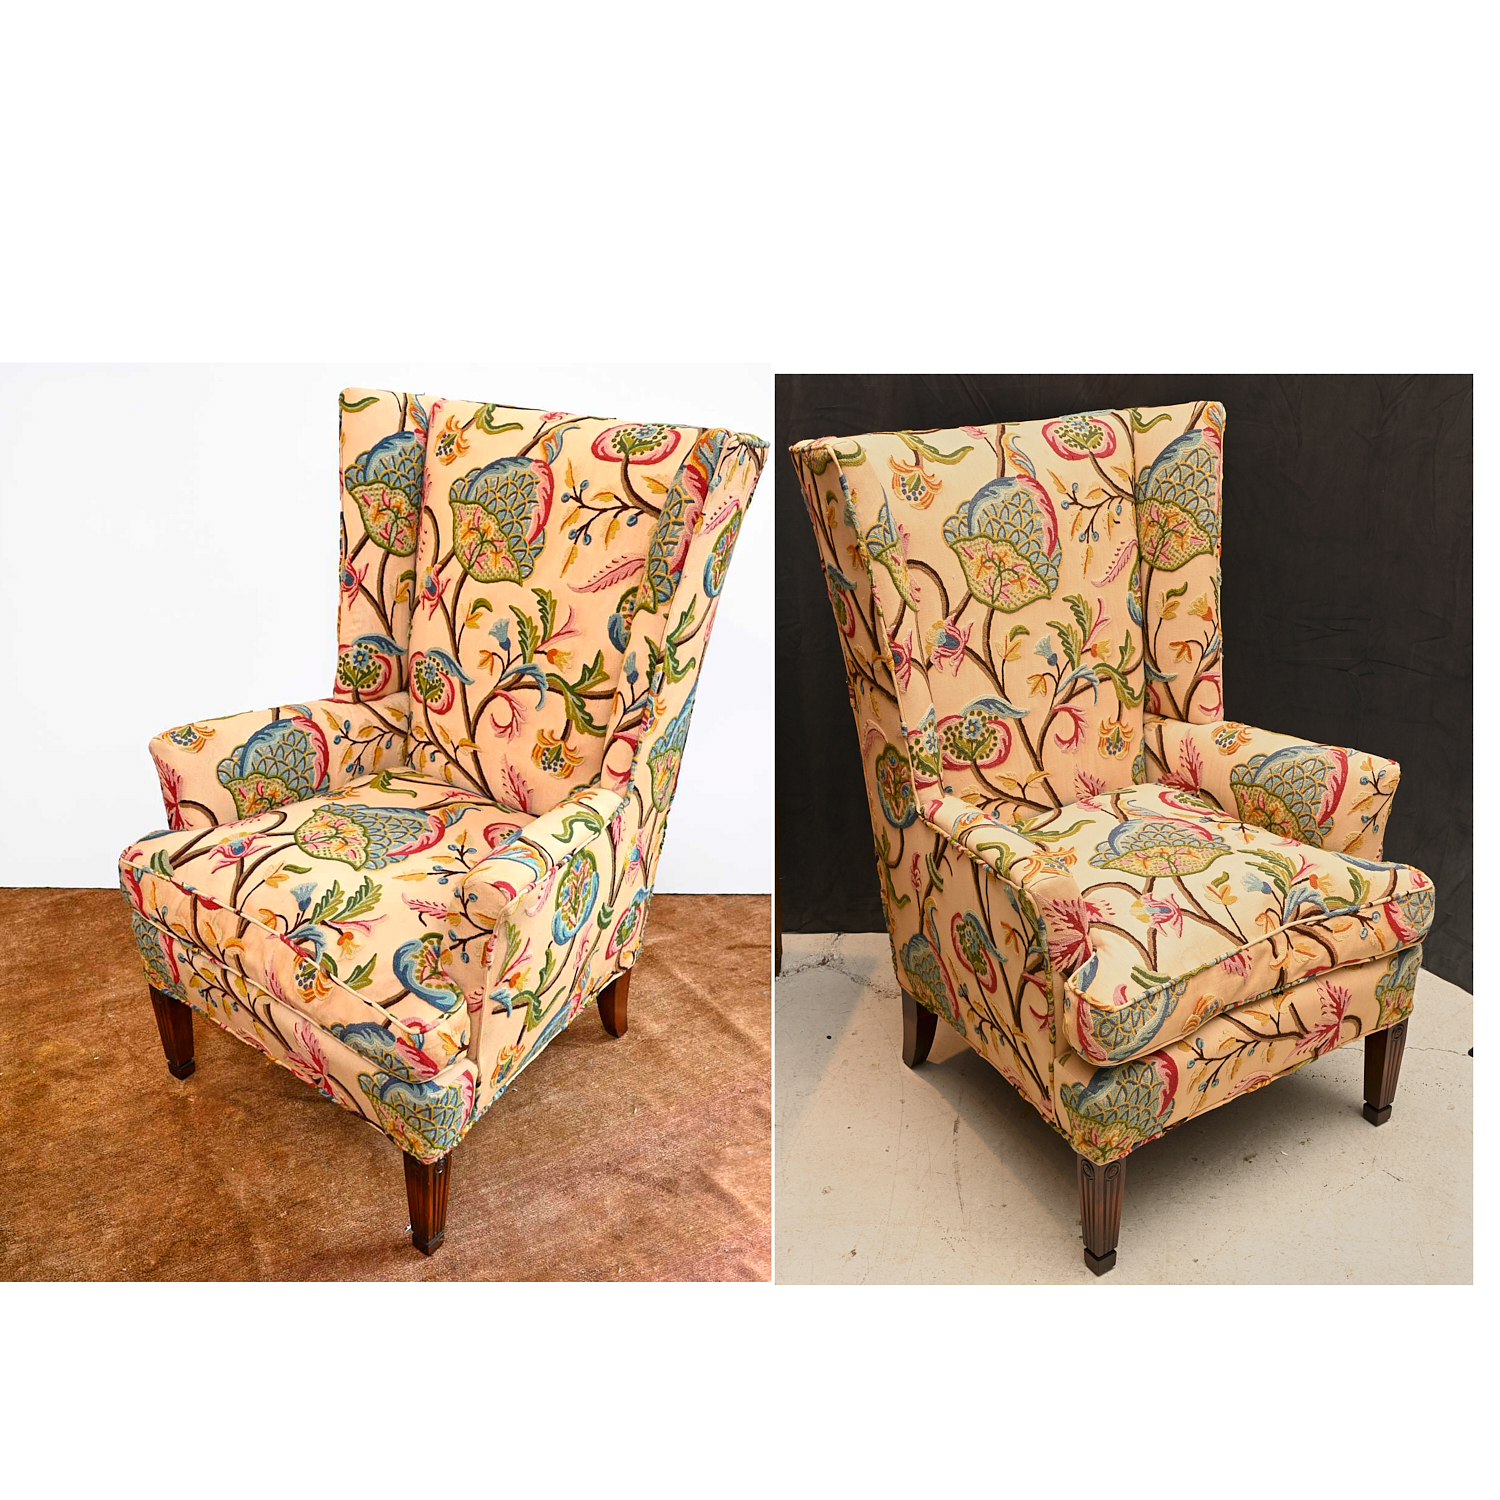 NICE PAIR CREWELWORK UPHOLSTERED